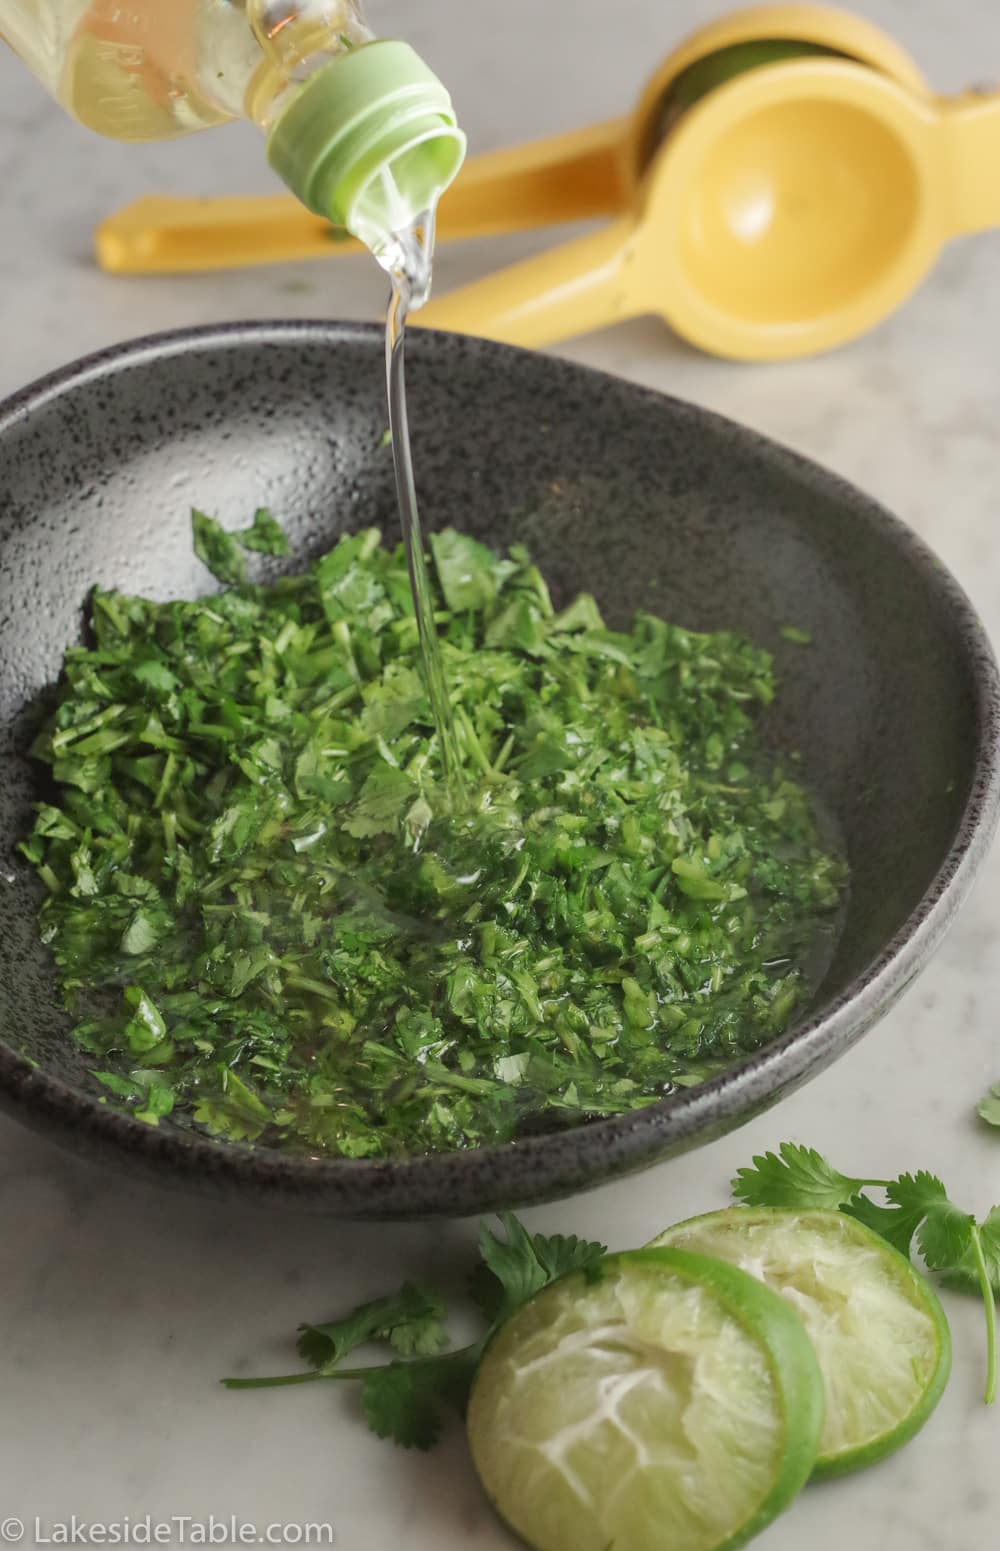 How to Make Easy Chimichurri Sauce with Cilantro